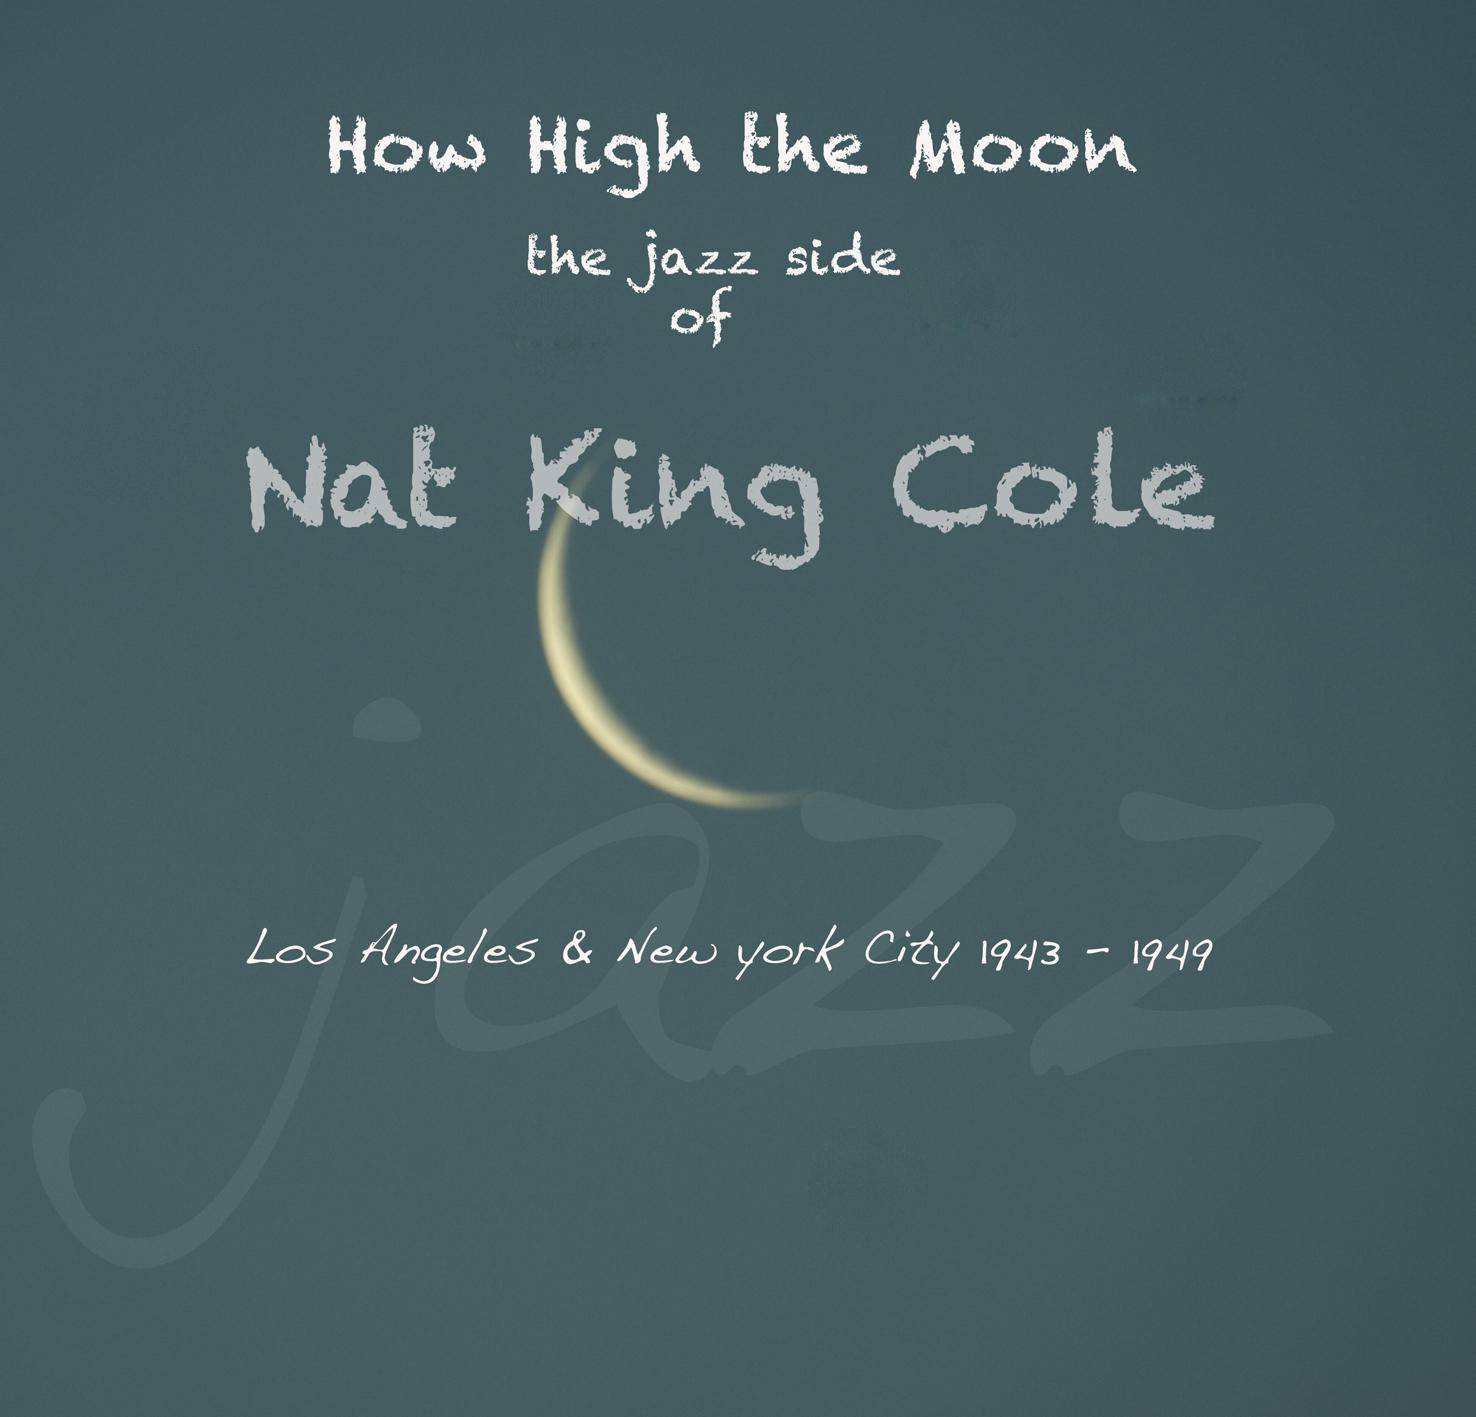 How High the Moon the Jazz Side of Nat King Cole